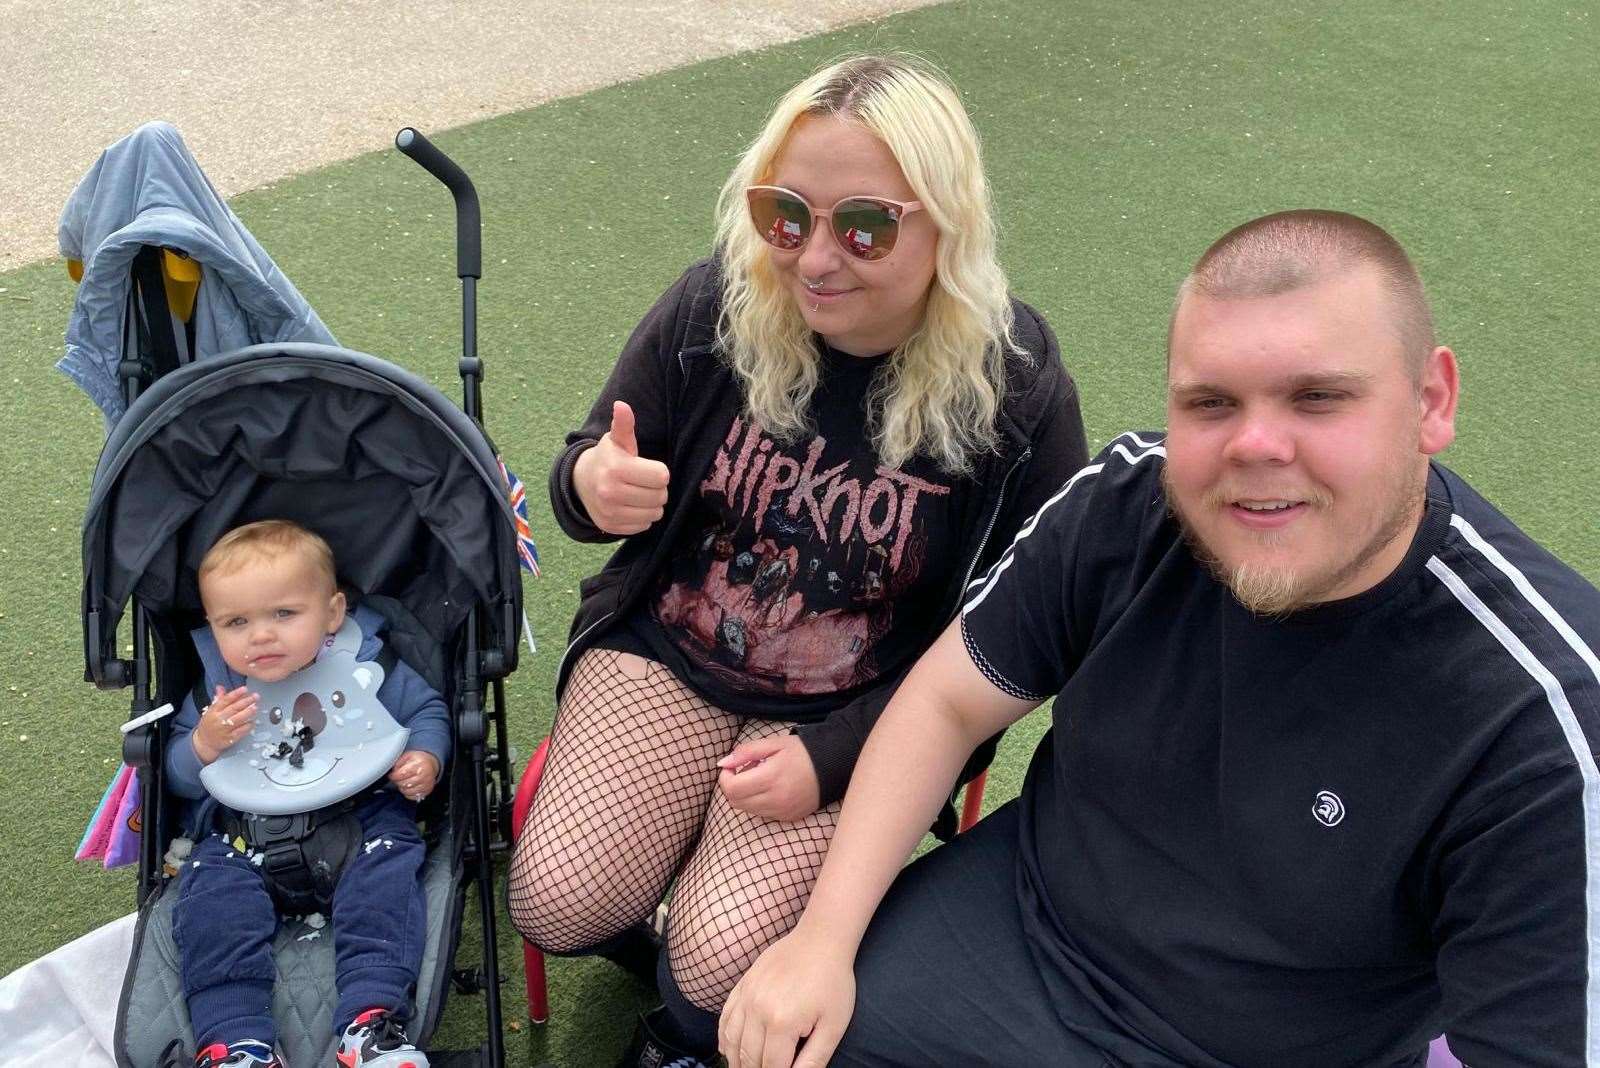 Cary Edby, from Ramsgate, who fell down a 12ft drop and fractured her neck in three places has made a miracle recovery and welcomed a baby boy. Picture: SWNS